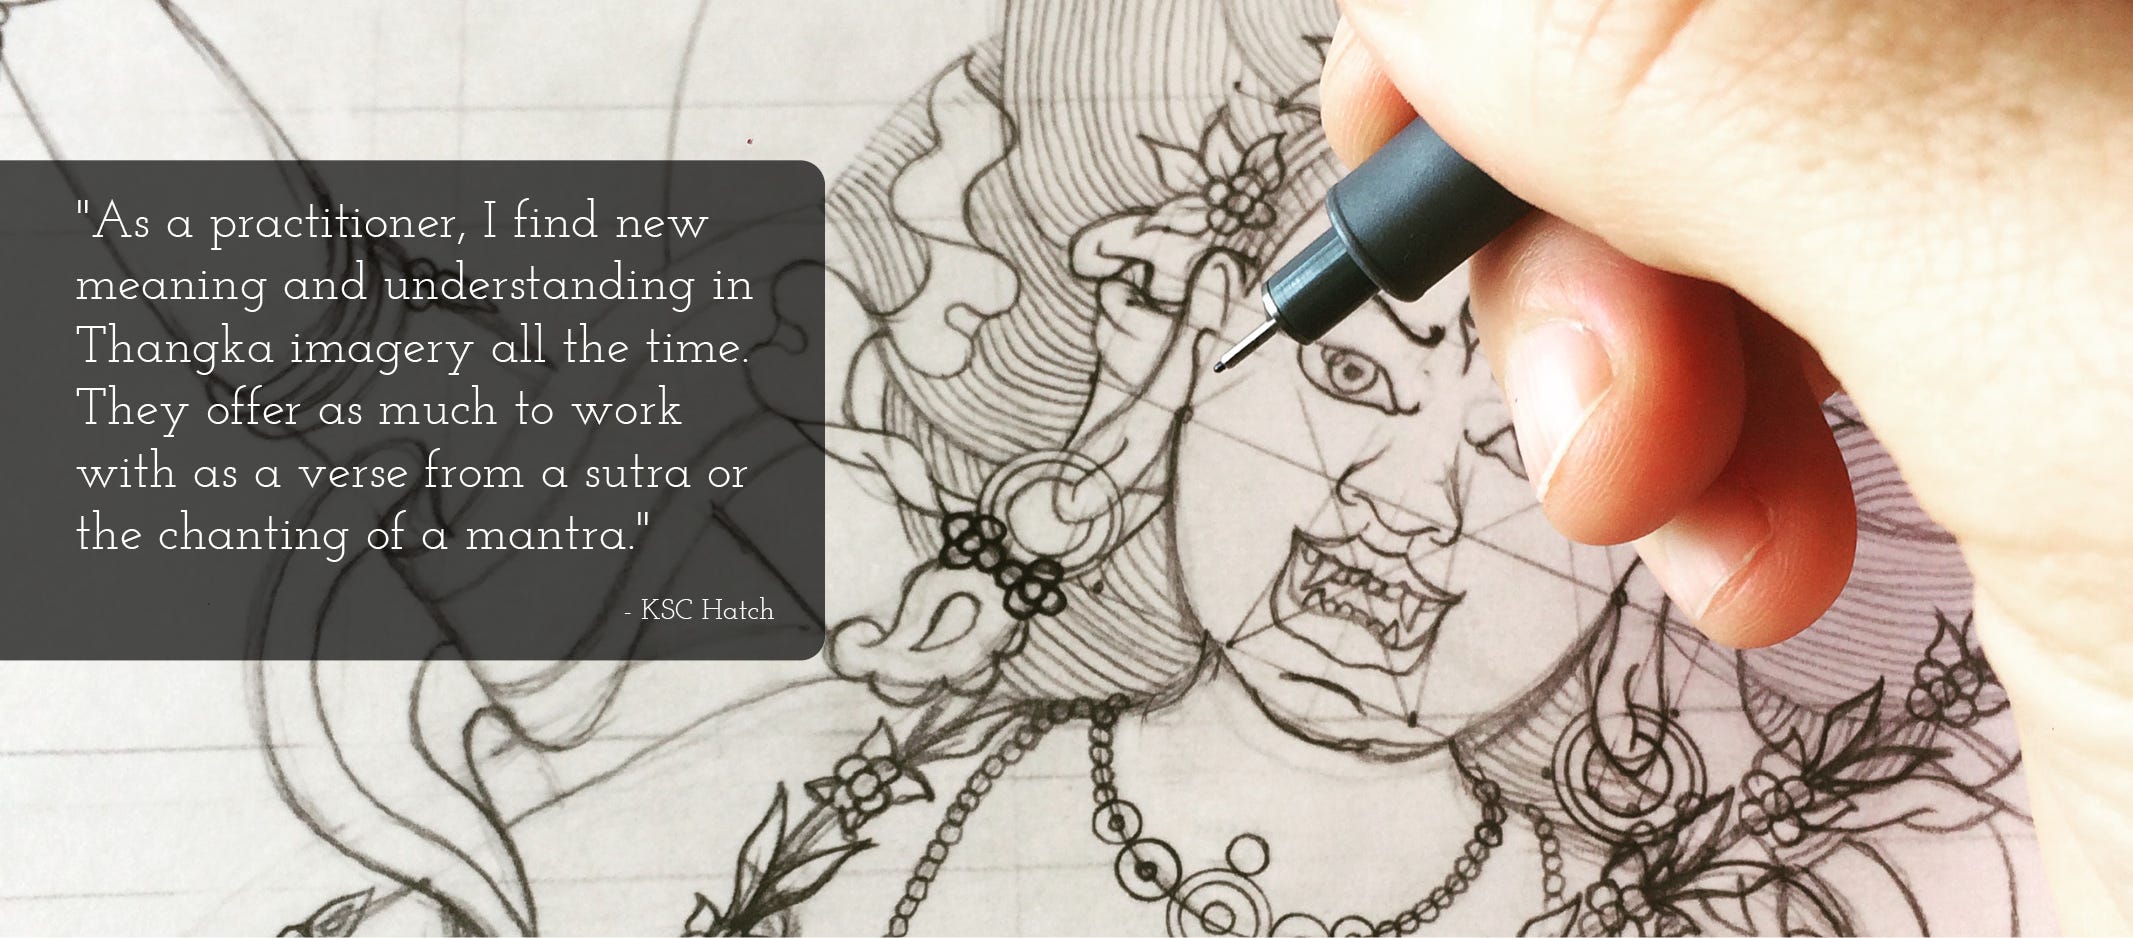 Close-up photo of a Thangka Line drawing in progess. The image is the wrathful face of the Dakini Kurukulla, partially in pencil and partially in fine line ink pen. The artist’s hand is in the upper right of the image, holding a fine line pen just above the drawing. There is quoted text taken from the article below on the right.